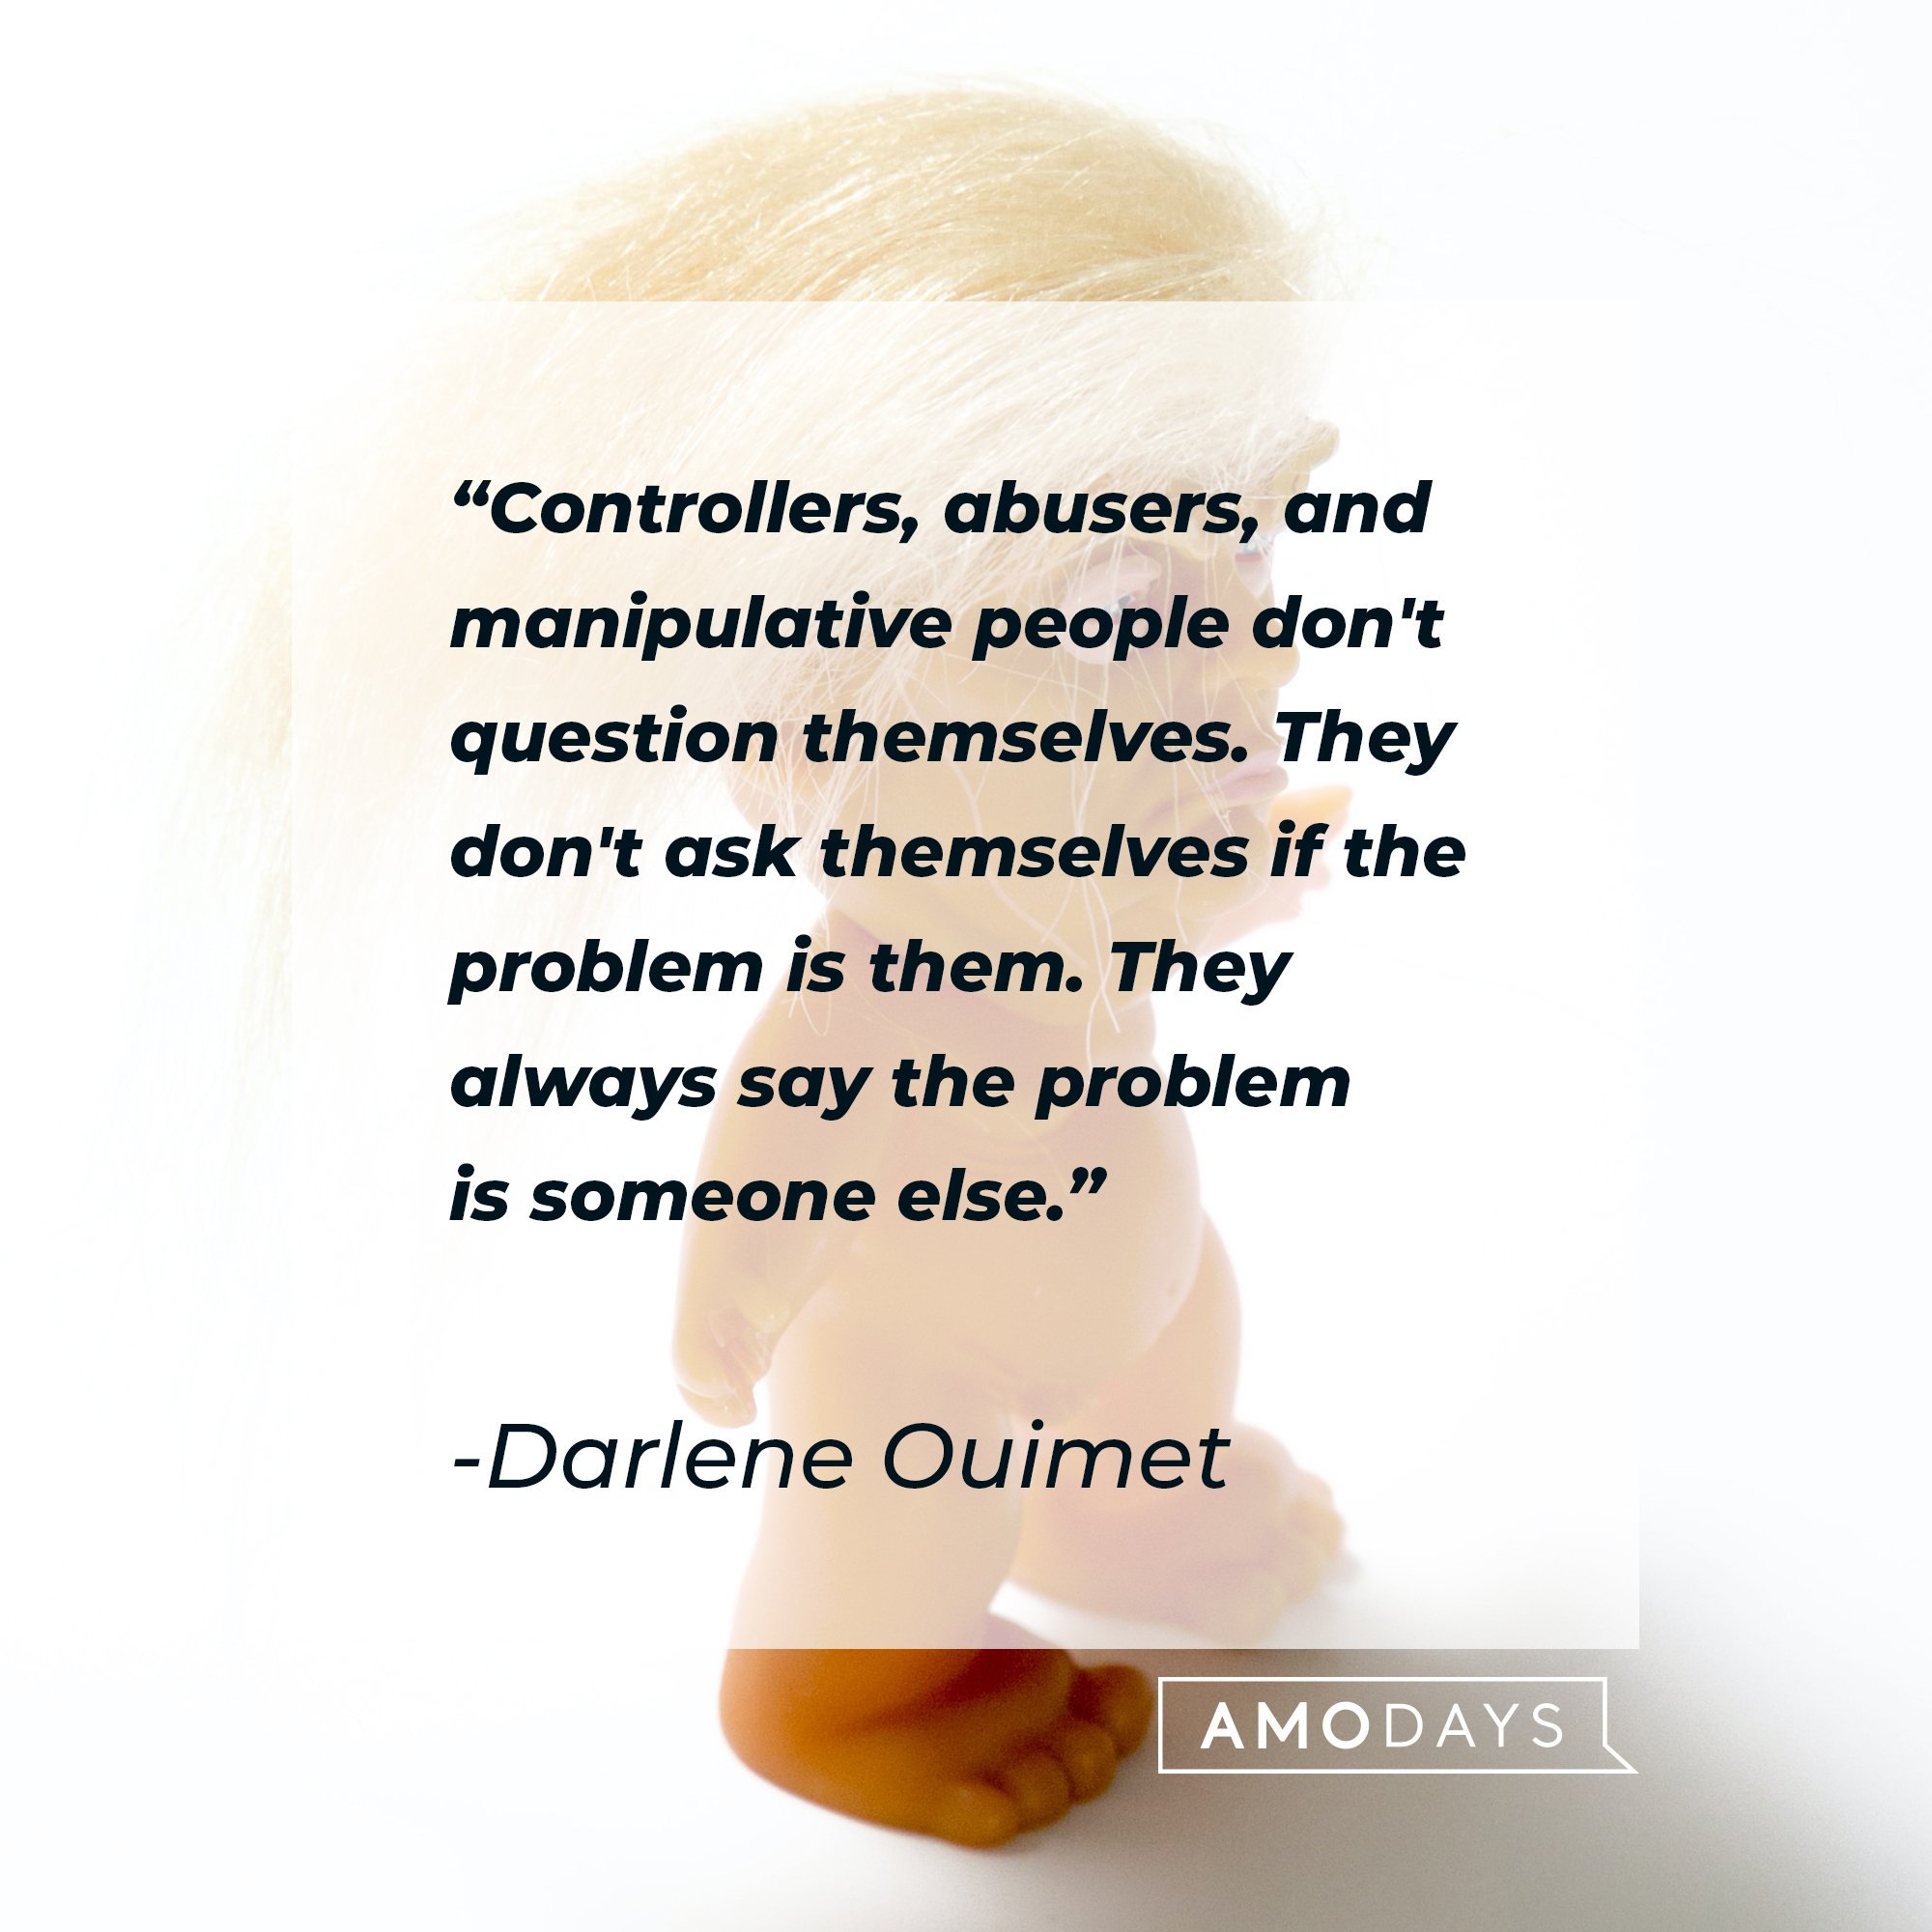 Darlene Ouimet's quote: "Controllers, abusers, and manipulative people don't question themselves. They don't ask themselves if the problem is them. They always say the problem is someone else." | Image: AmoDays